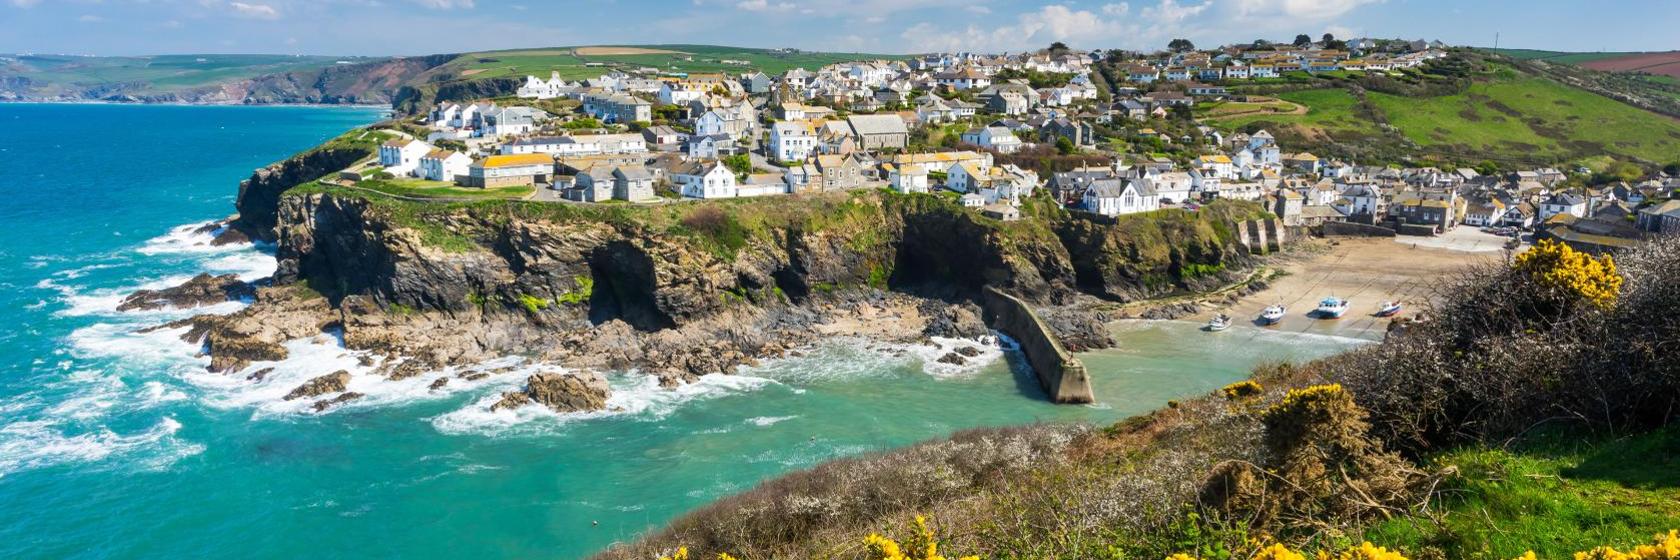 10 Best Port Isaac Hotels United Kingdom From 68